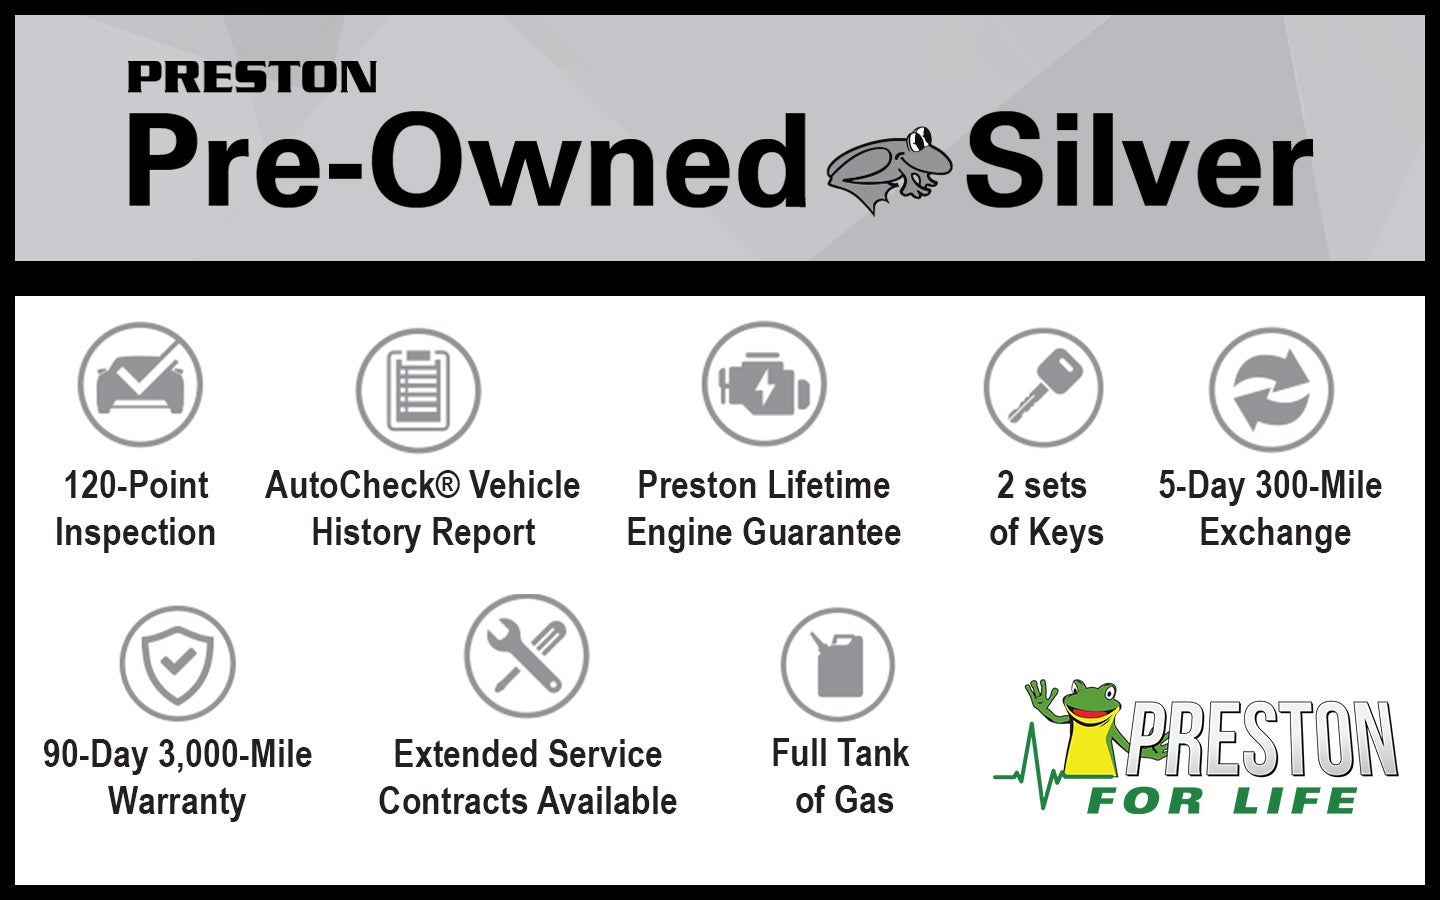 Pre-Owned Silver at Preston Ford Commercial Vehicle Center in Hurlock MD